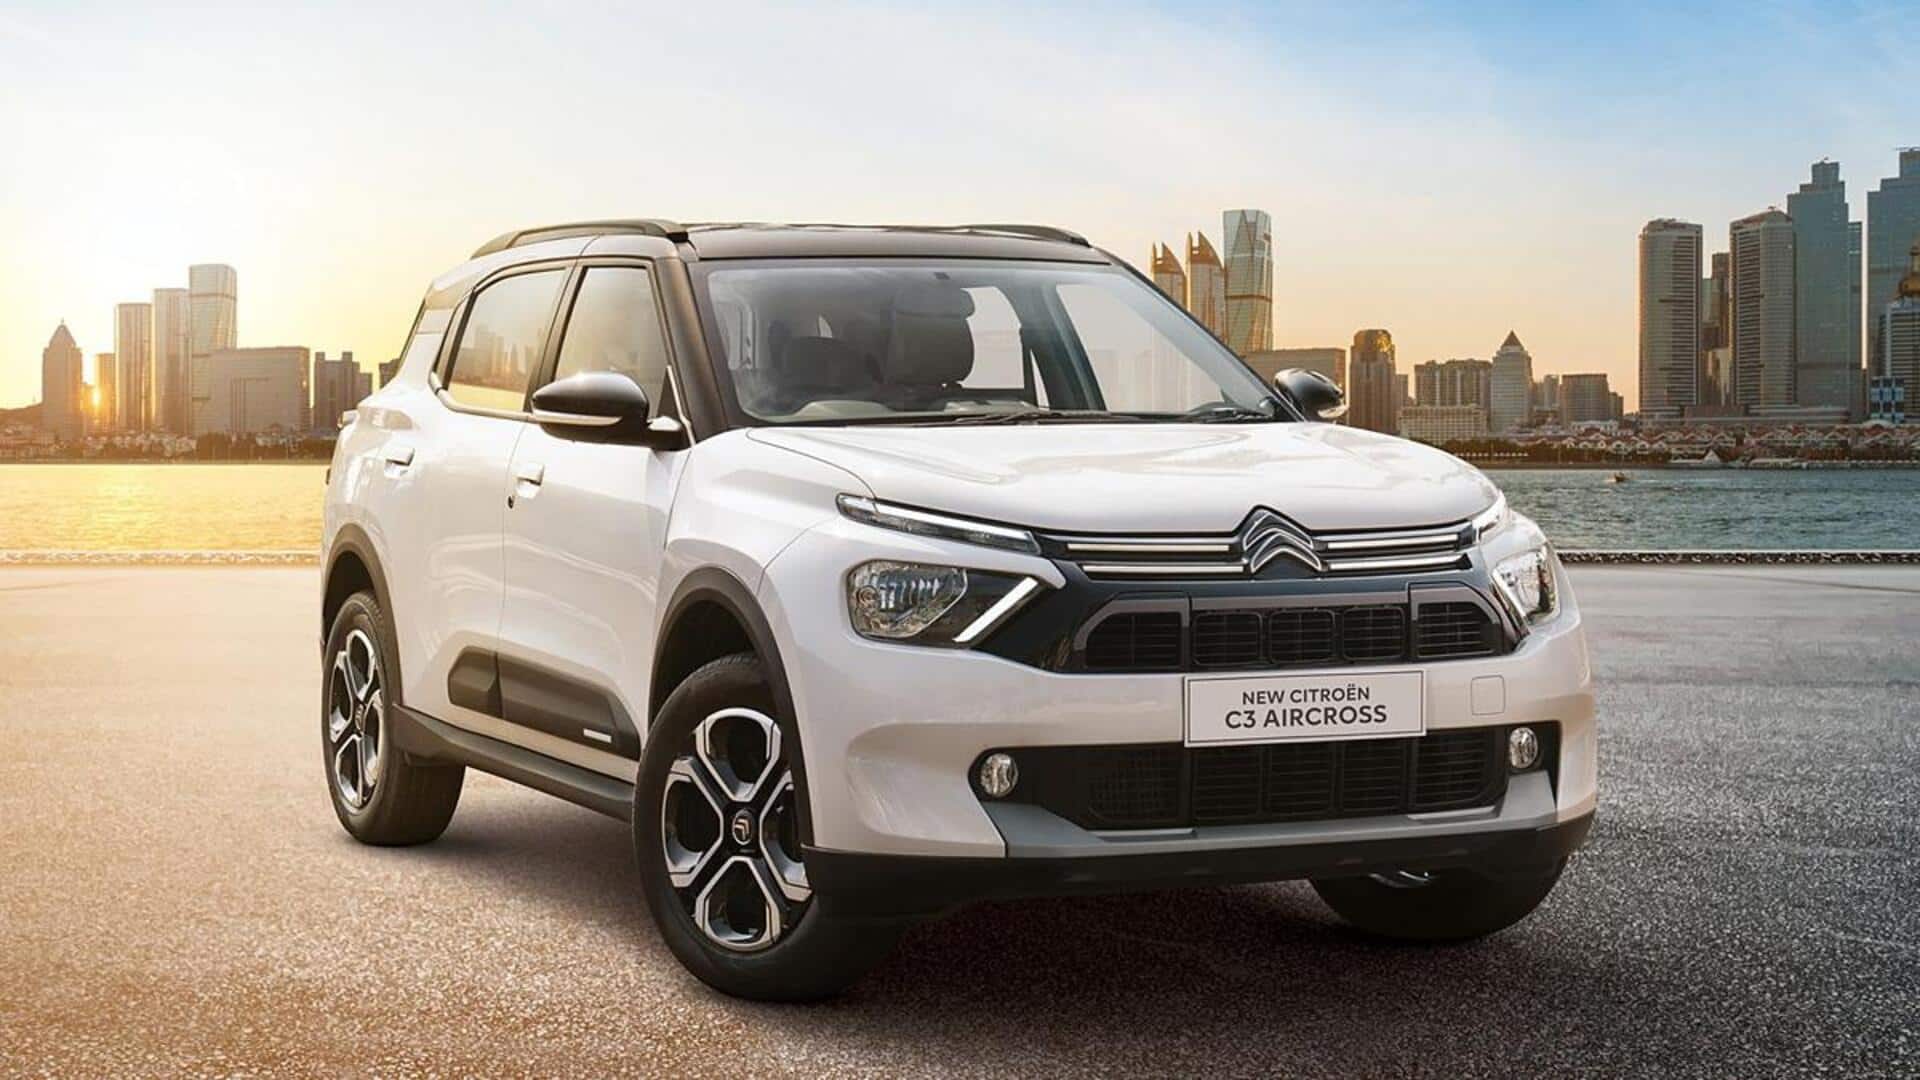 Citroen C3 Aircross (automatic) delivers a mileage of 17.6km/liter